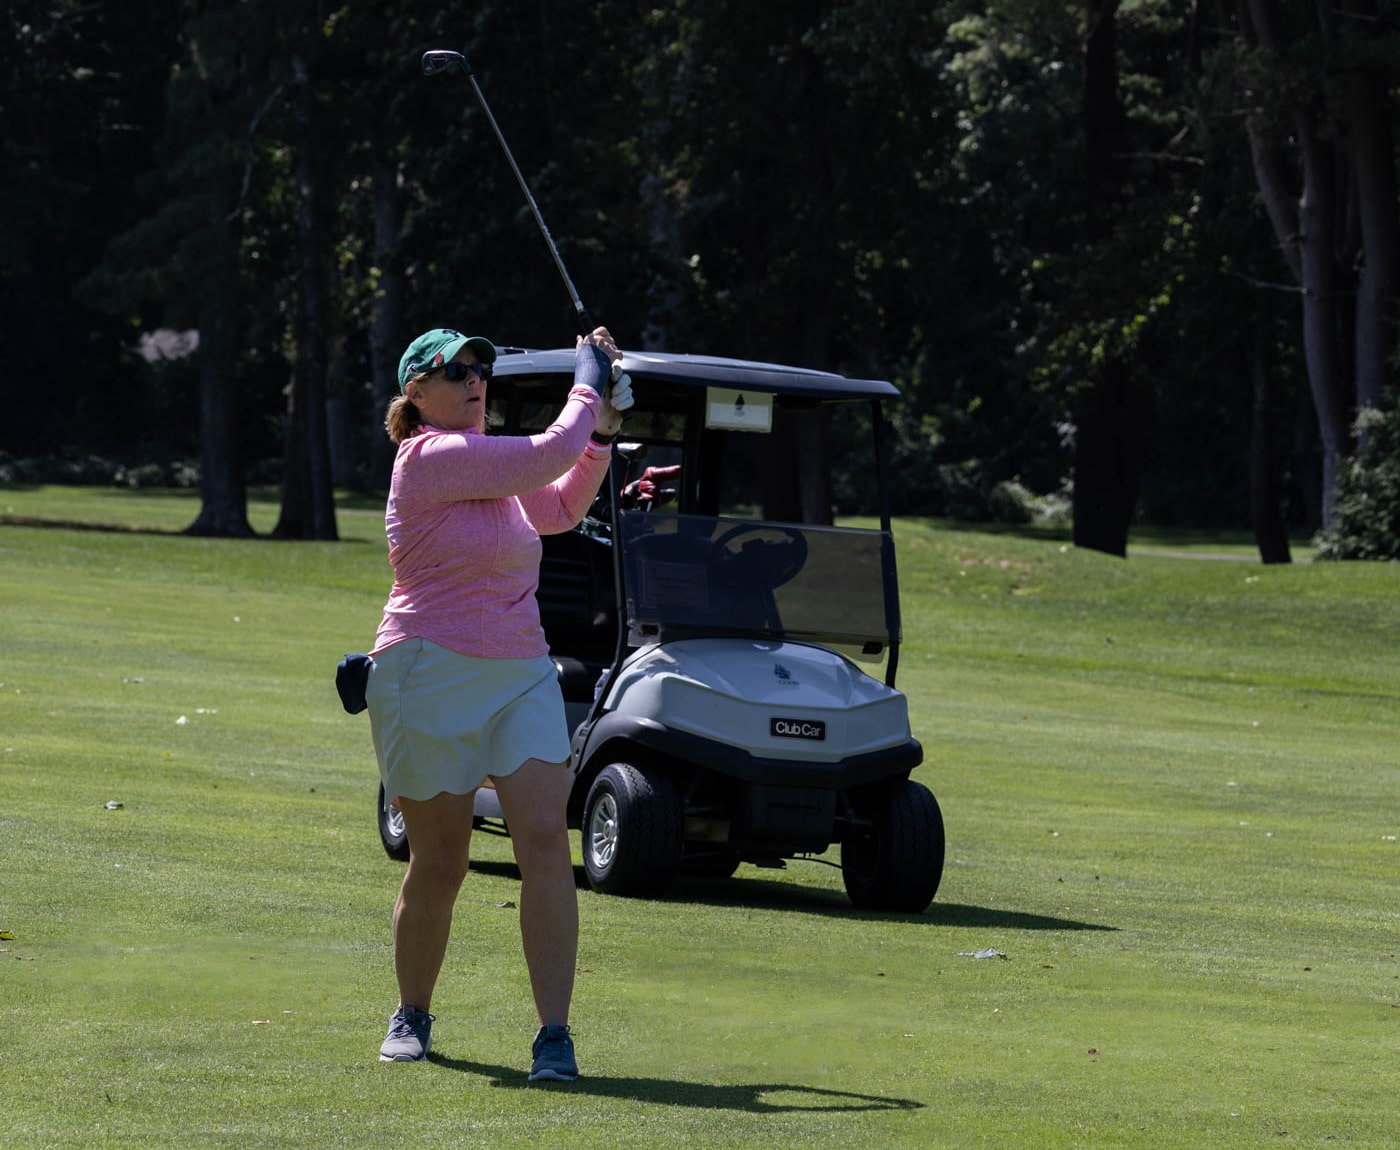 Country-Club-Of-New-Bedford FB-2023-Womens-FB-Gallery August-2023-Country-Club-Of-New-Bedford-FB-2023-Womens-FB-Gallery August-2023-Womens-FB-Gallery-Tuesday-Photos-Image-34